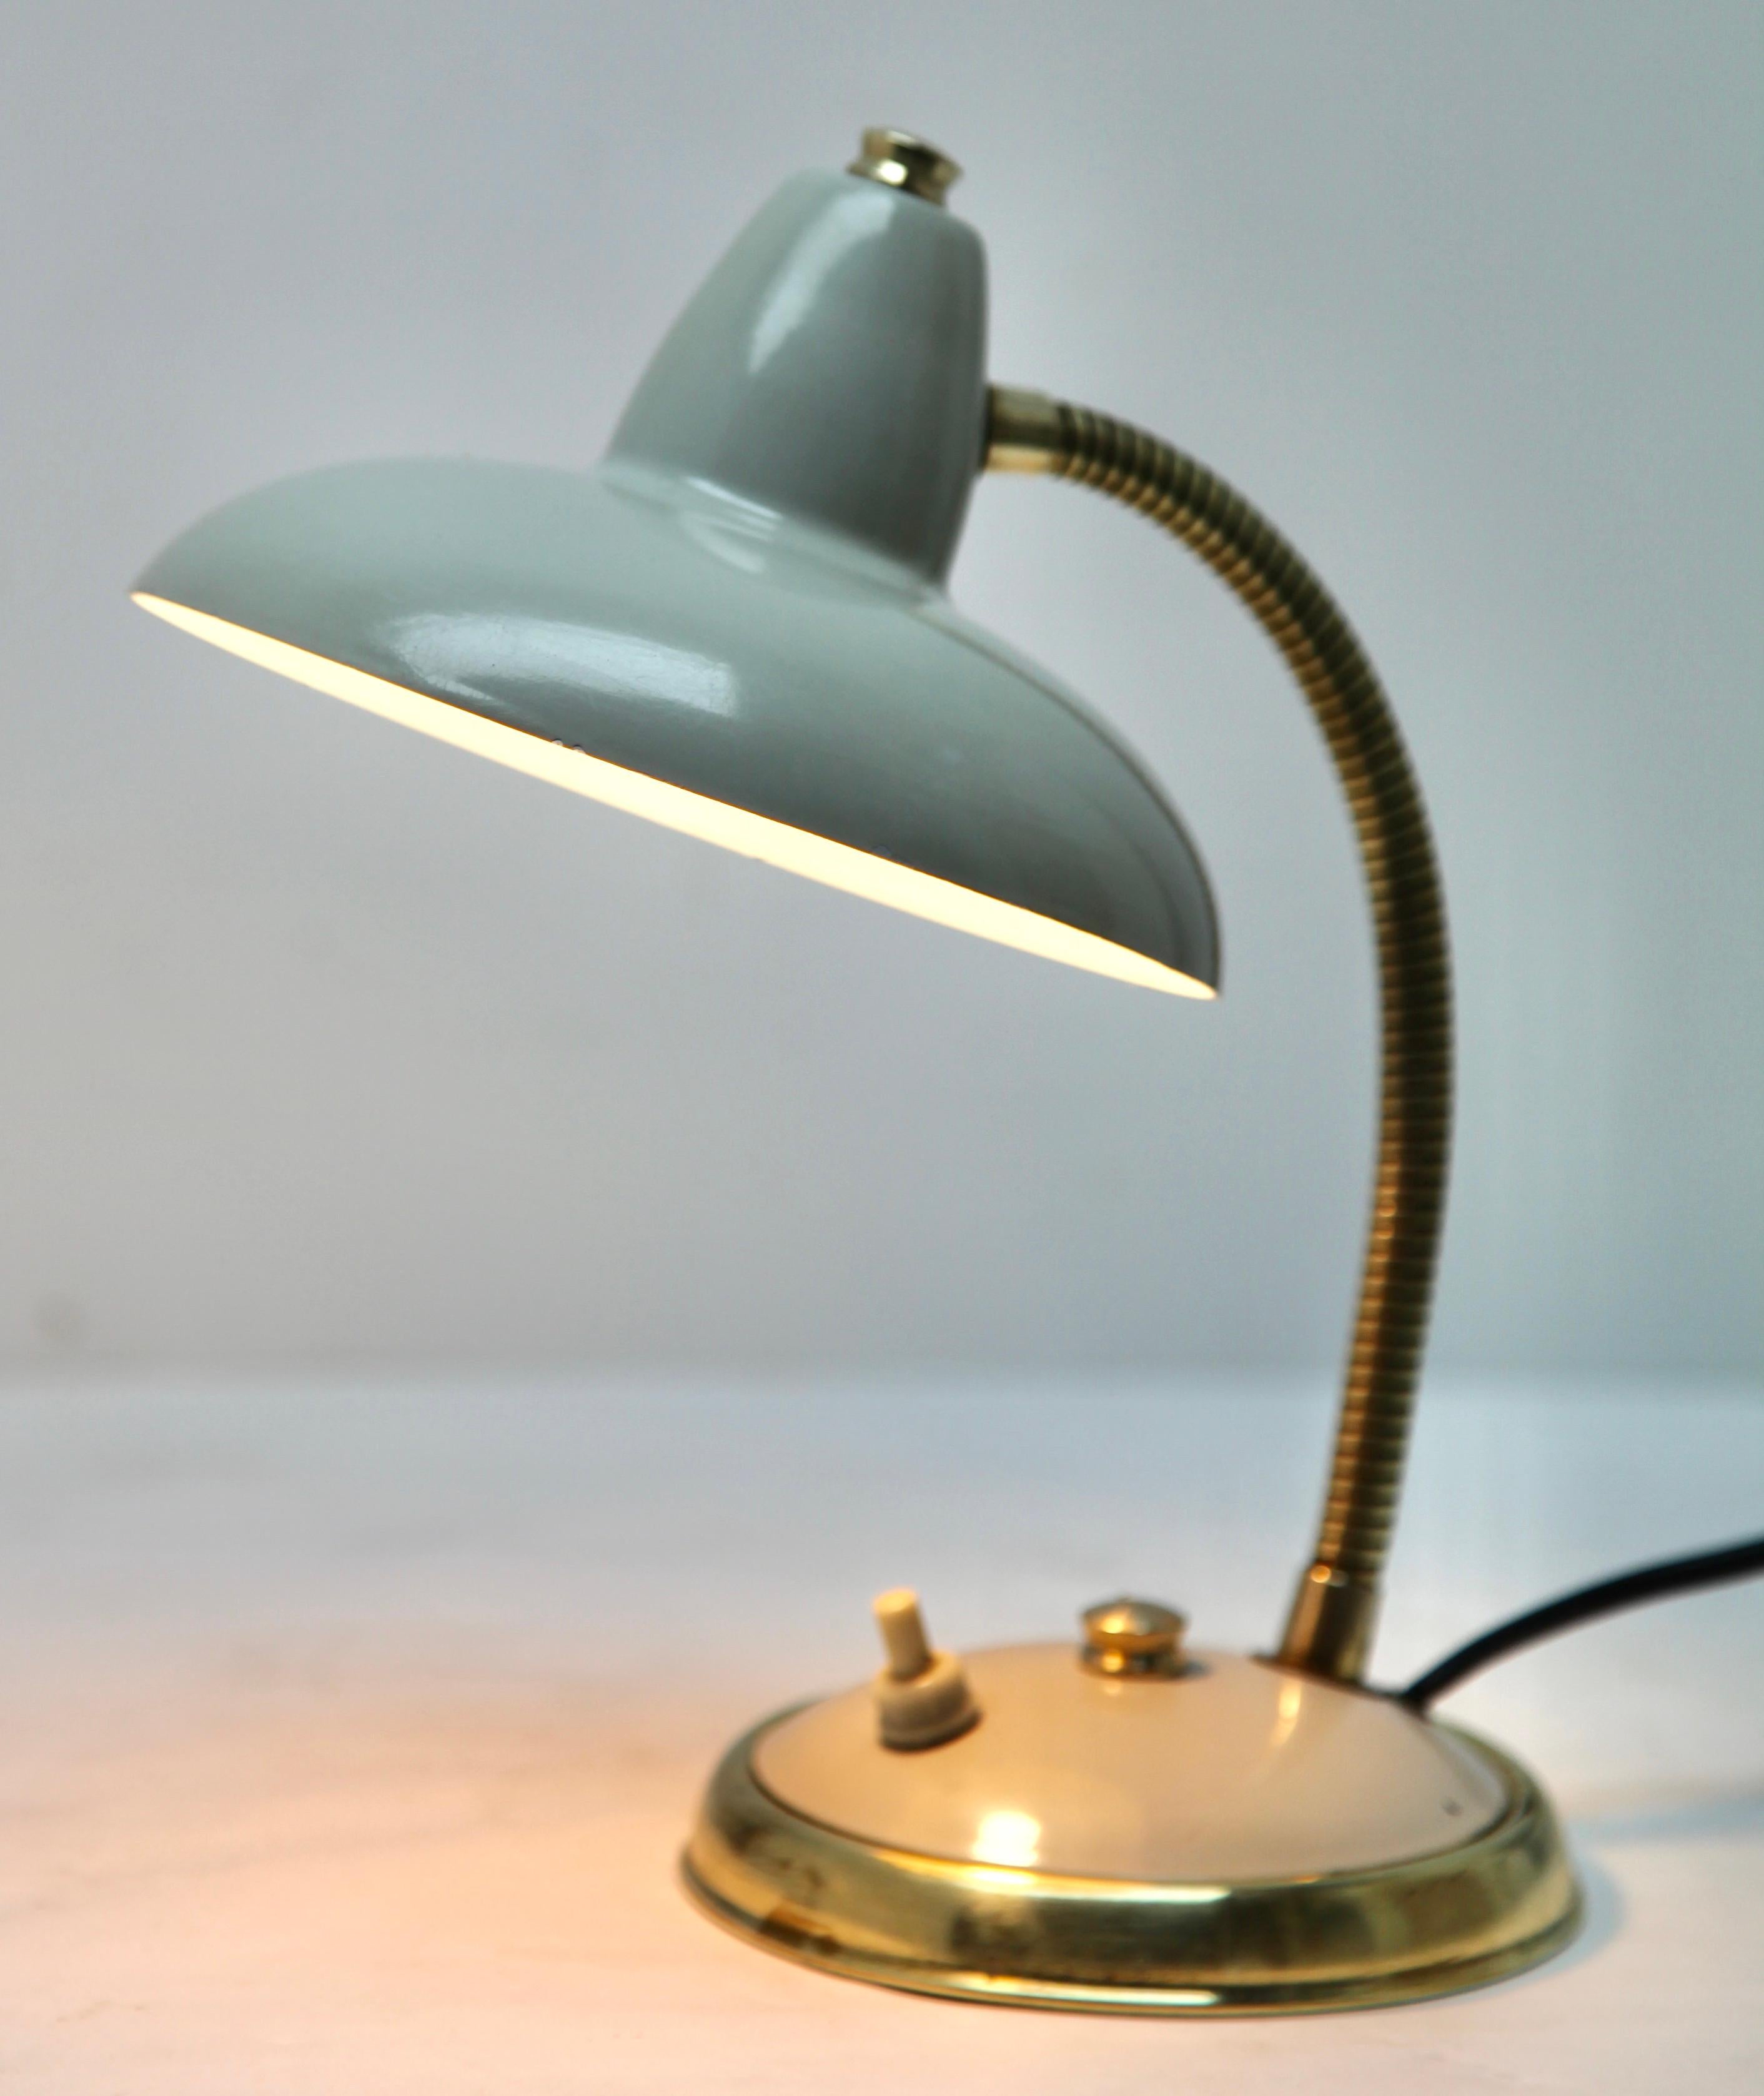 Machine-Made Vintage French Desk or Bedside Lamp from Aluminor France, 1950s For Sale